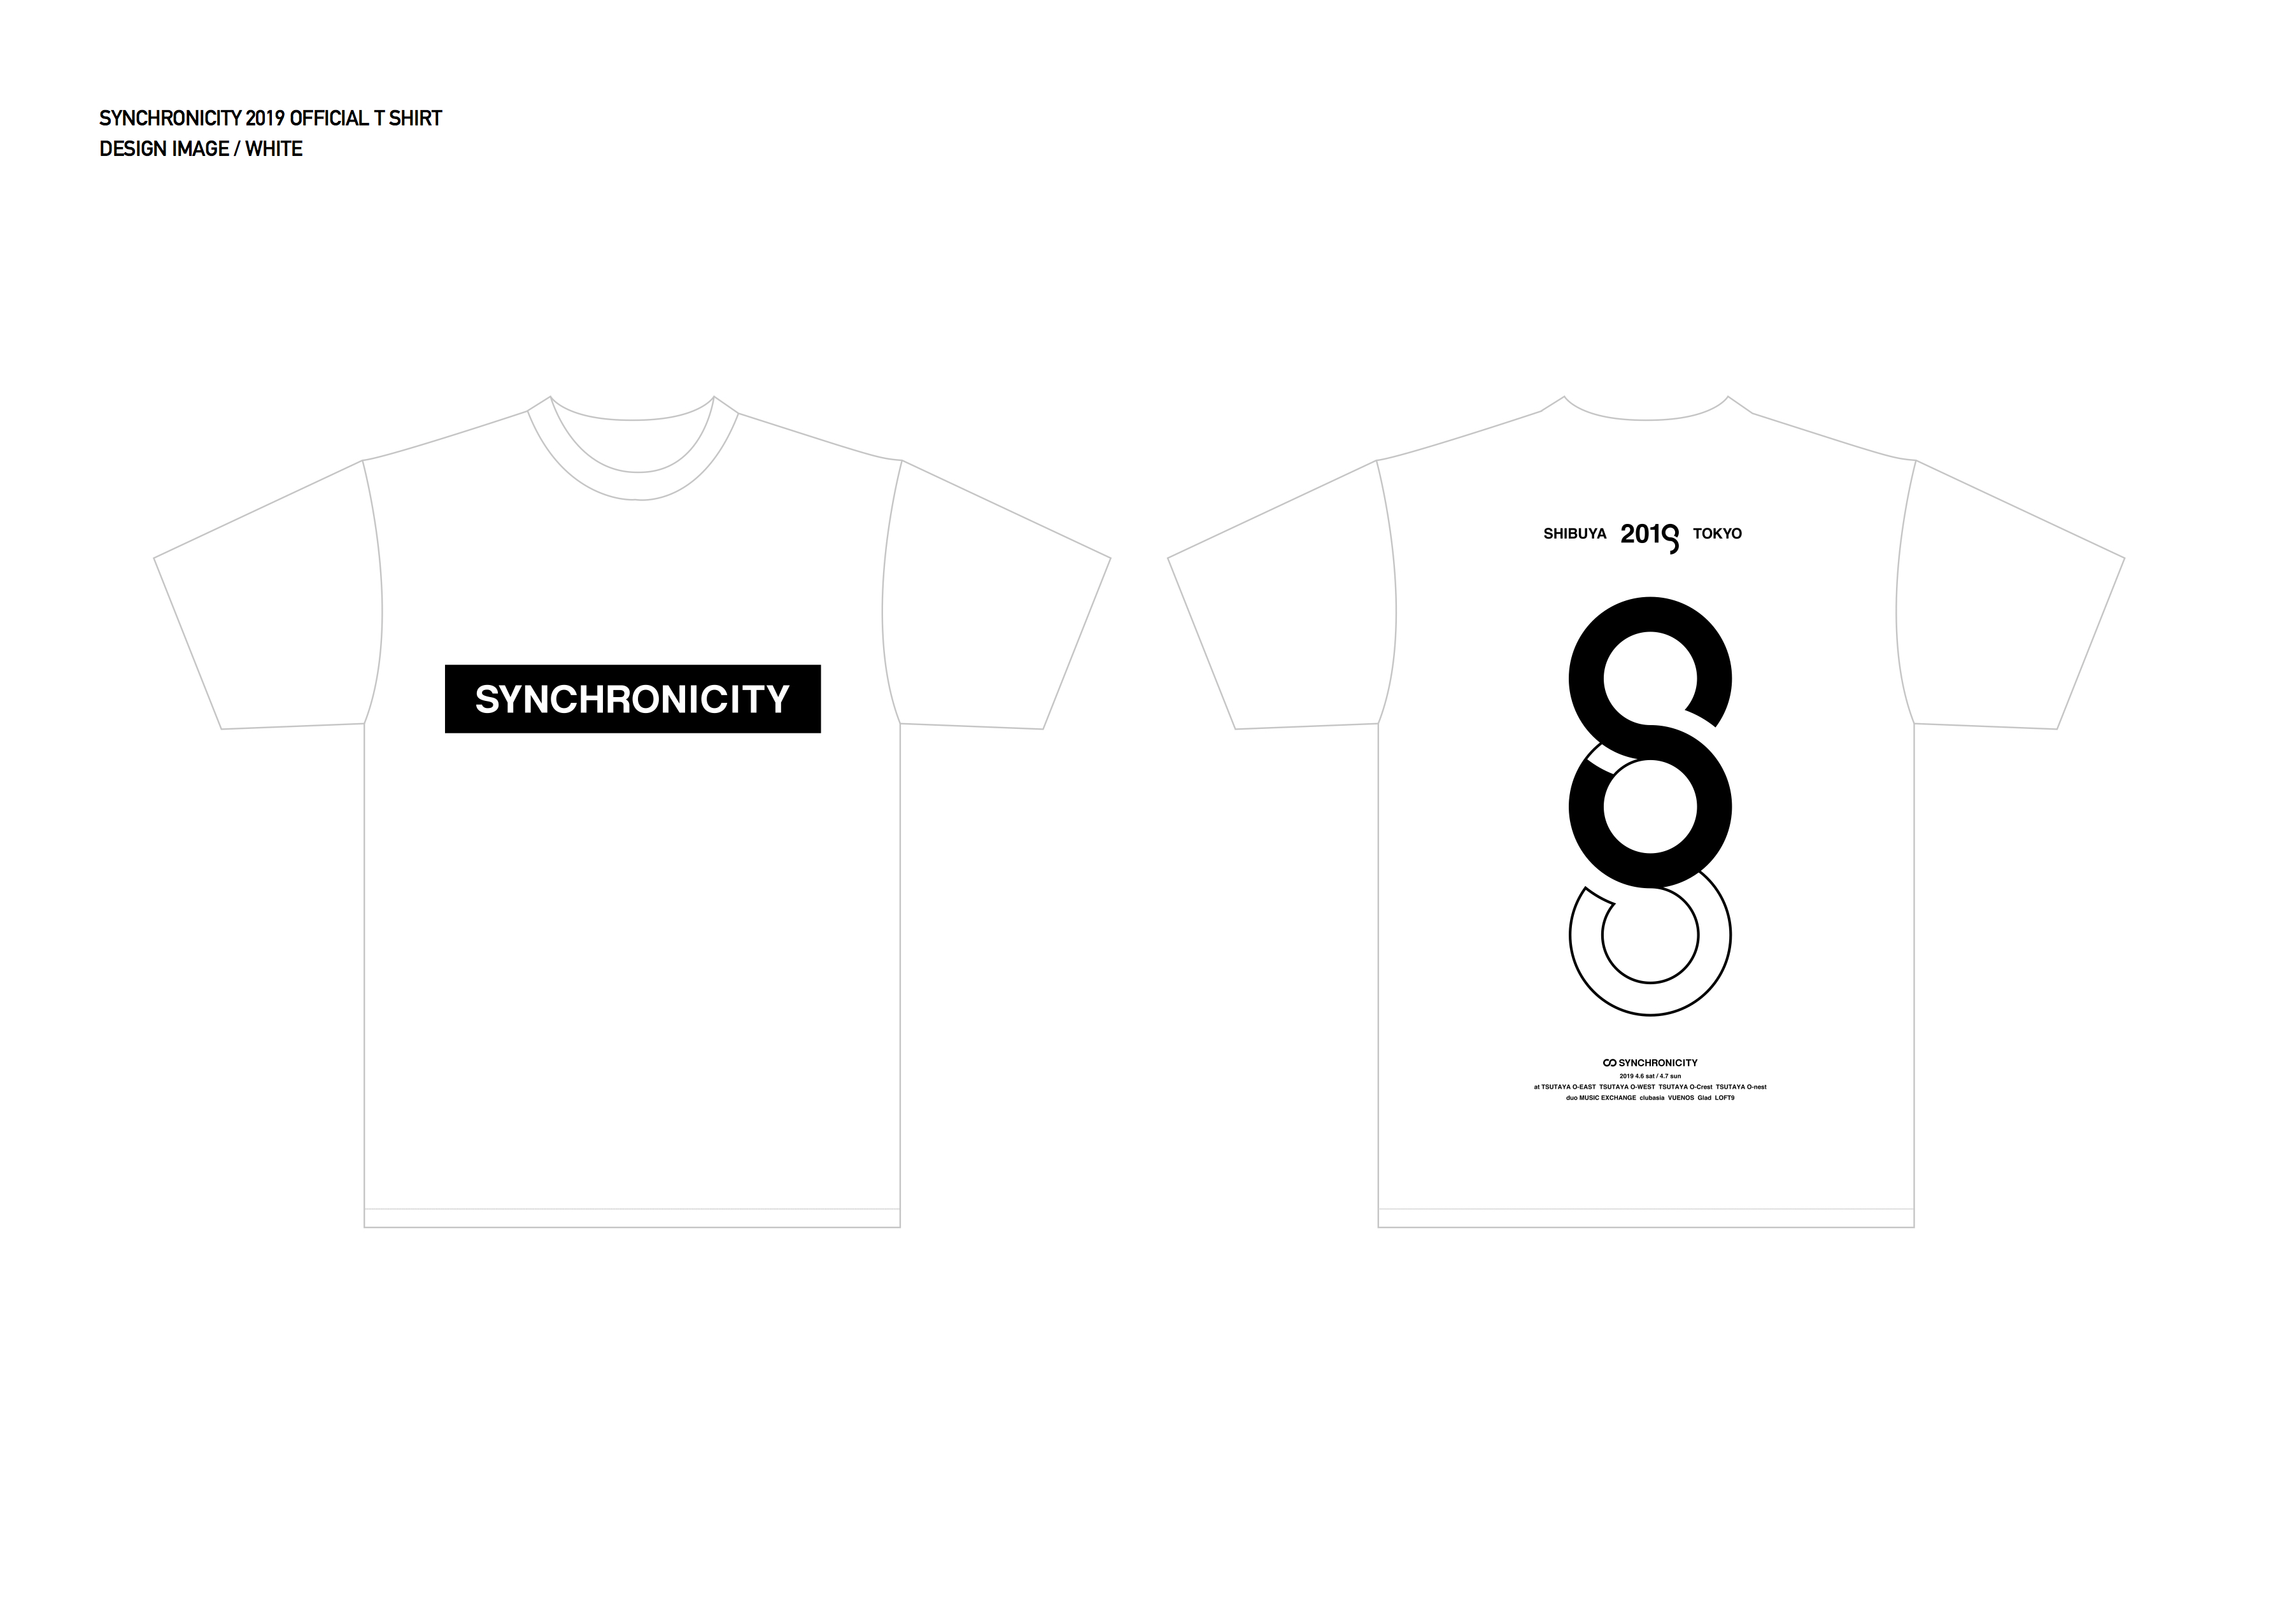 synchronicity-2019-tee_official-image_white